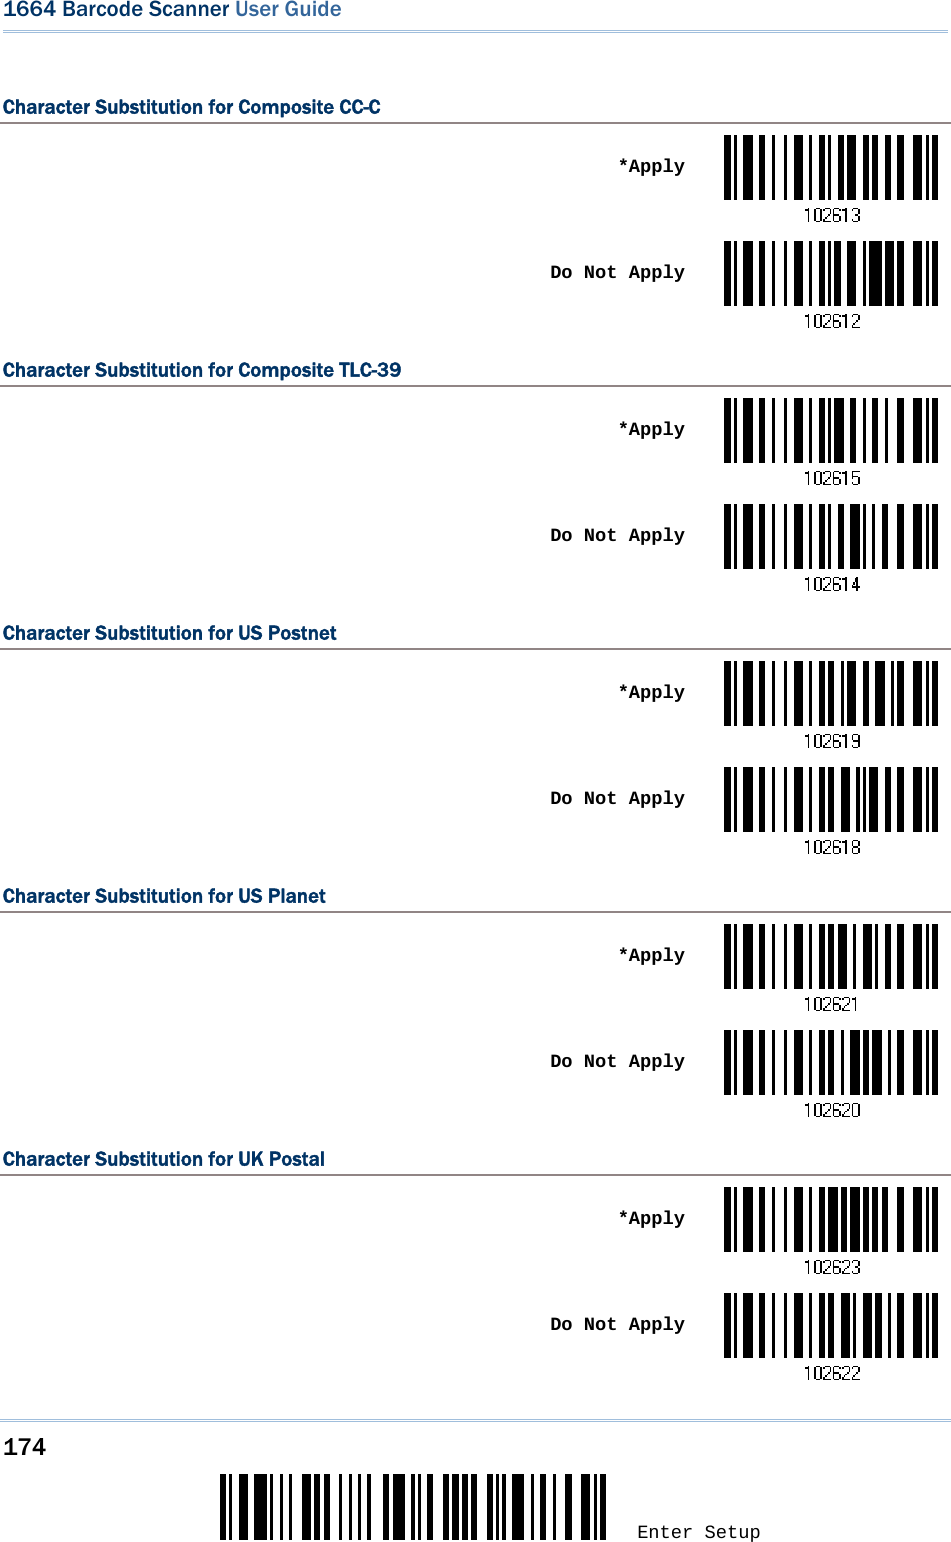 174 Enter Setup 1664 Barcode Scanner User Guide  Character Substitution for Composite CC-C  *Apply Do Not ApplyCharacter Substitution for Composite TLC-39  *Apply Do Not ApplyCharacter Substitution for US Postnet  *Apply Do Not ApplyCharacter Substitution for US Planet  *Apply Do Not ApplyCharacter Substitution for UK Postal  *Apply Do Not Apply